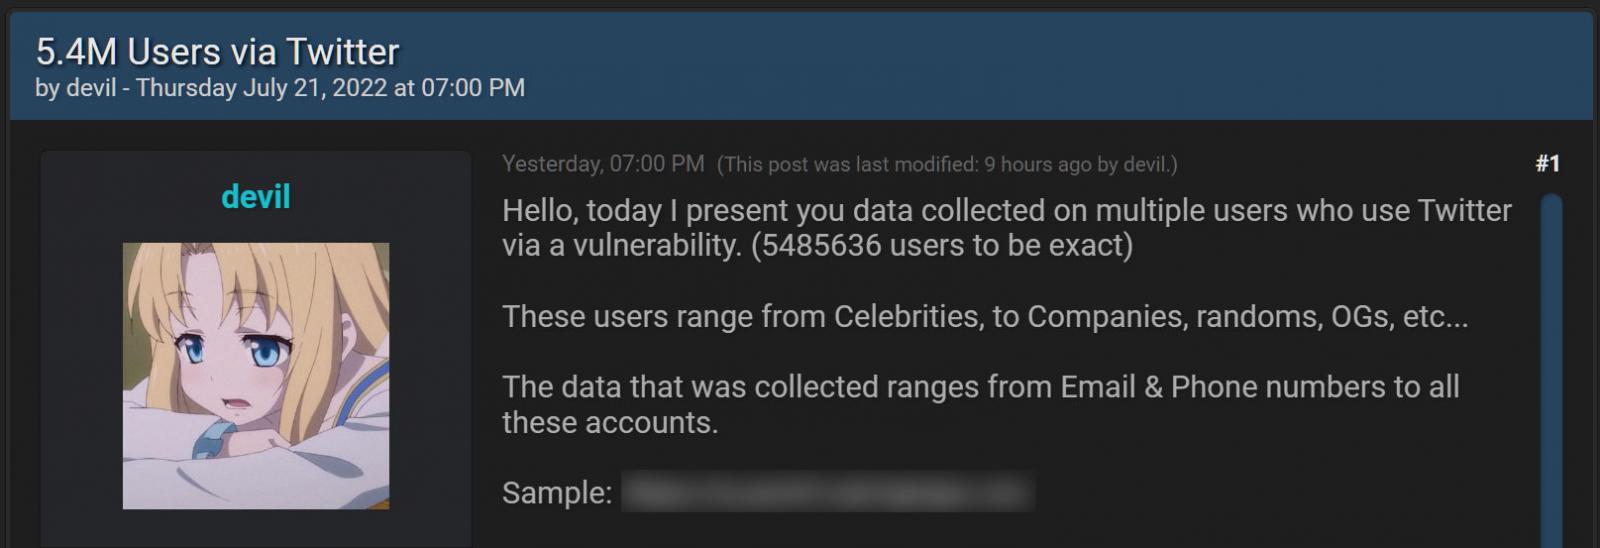 Forum post selling recovered Twitter data